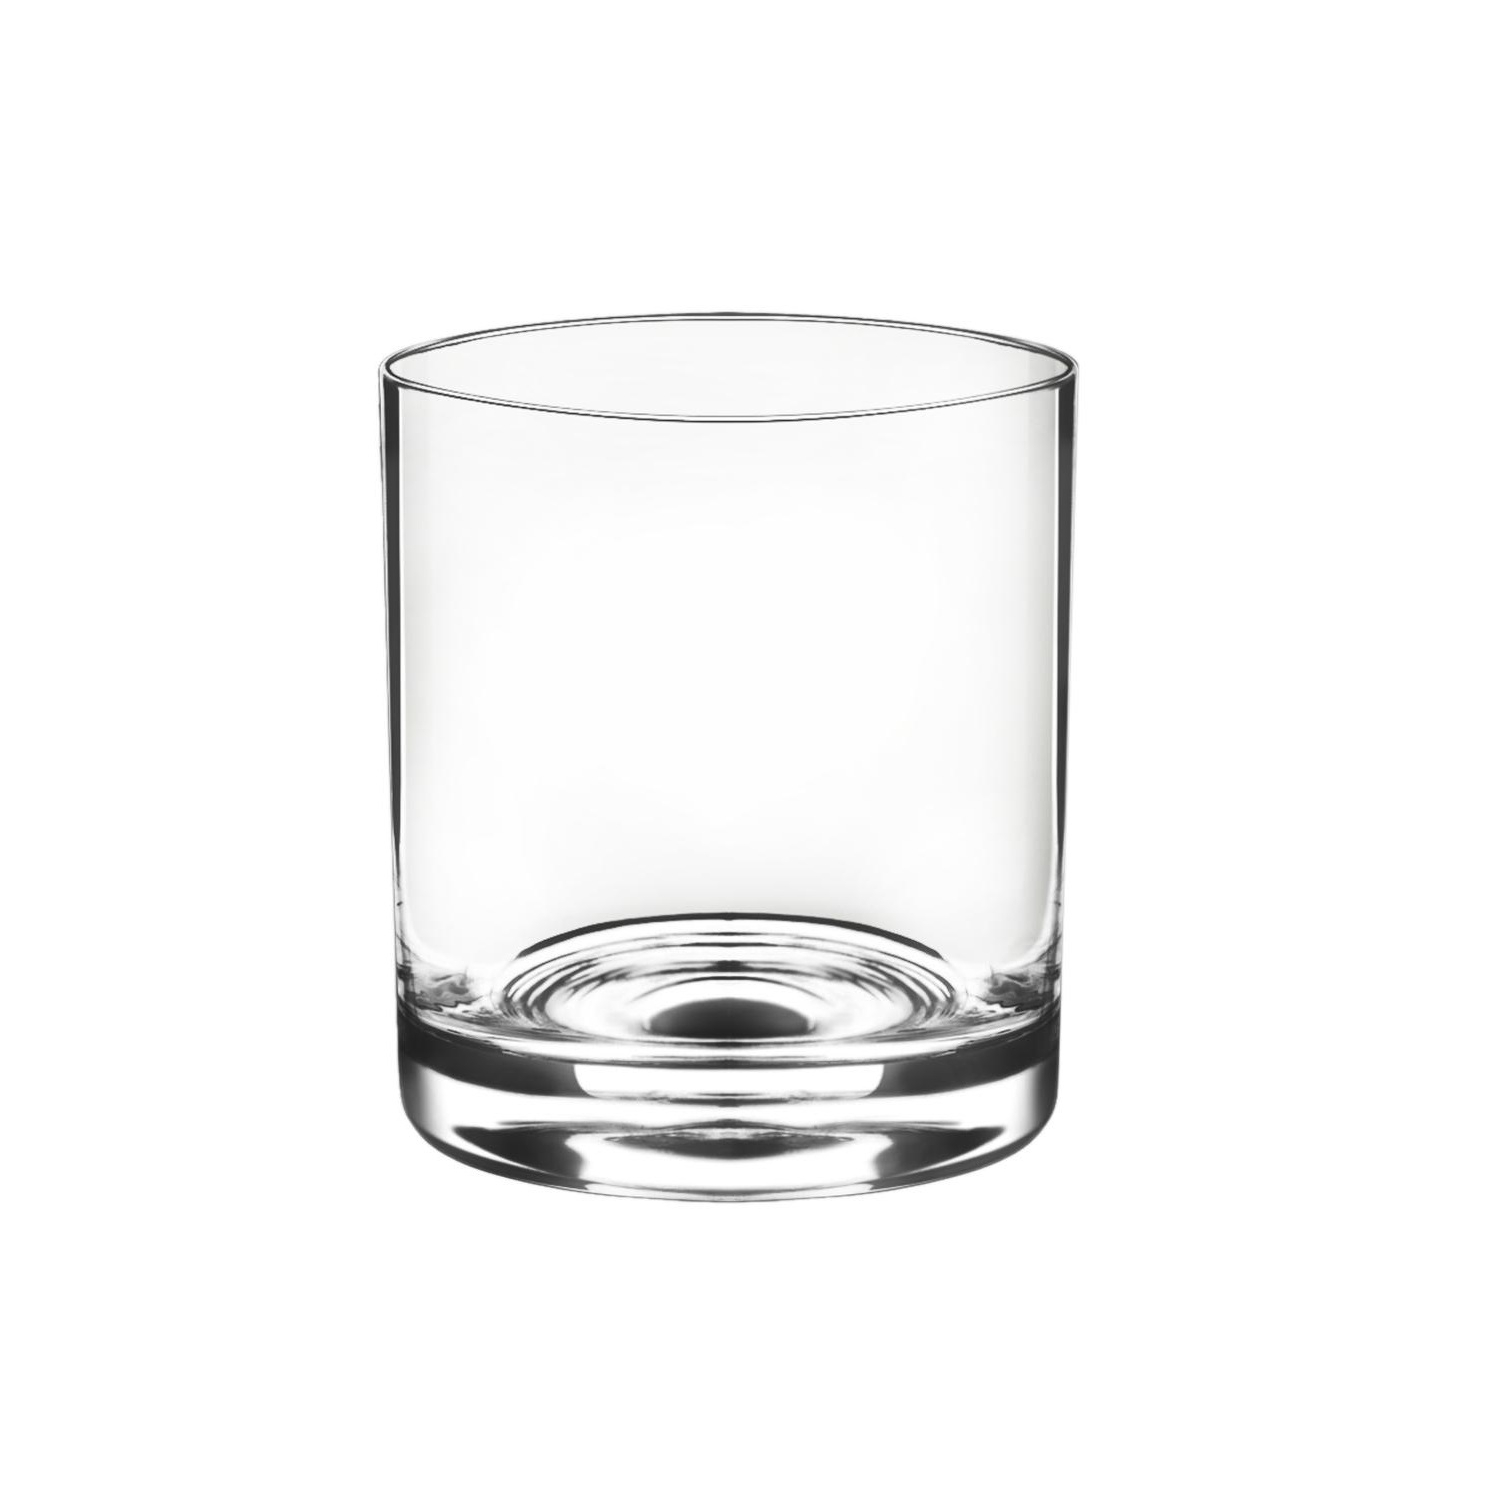 Wilmax High Quality Crystal Glass 300ML Set of 6 WL‑888023-6A